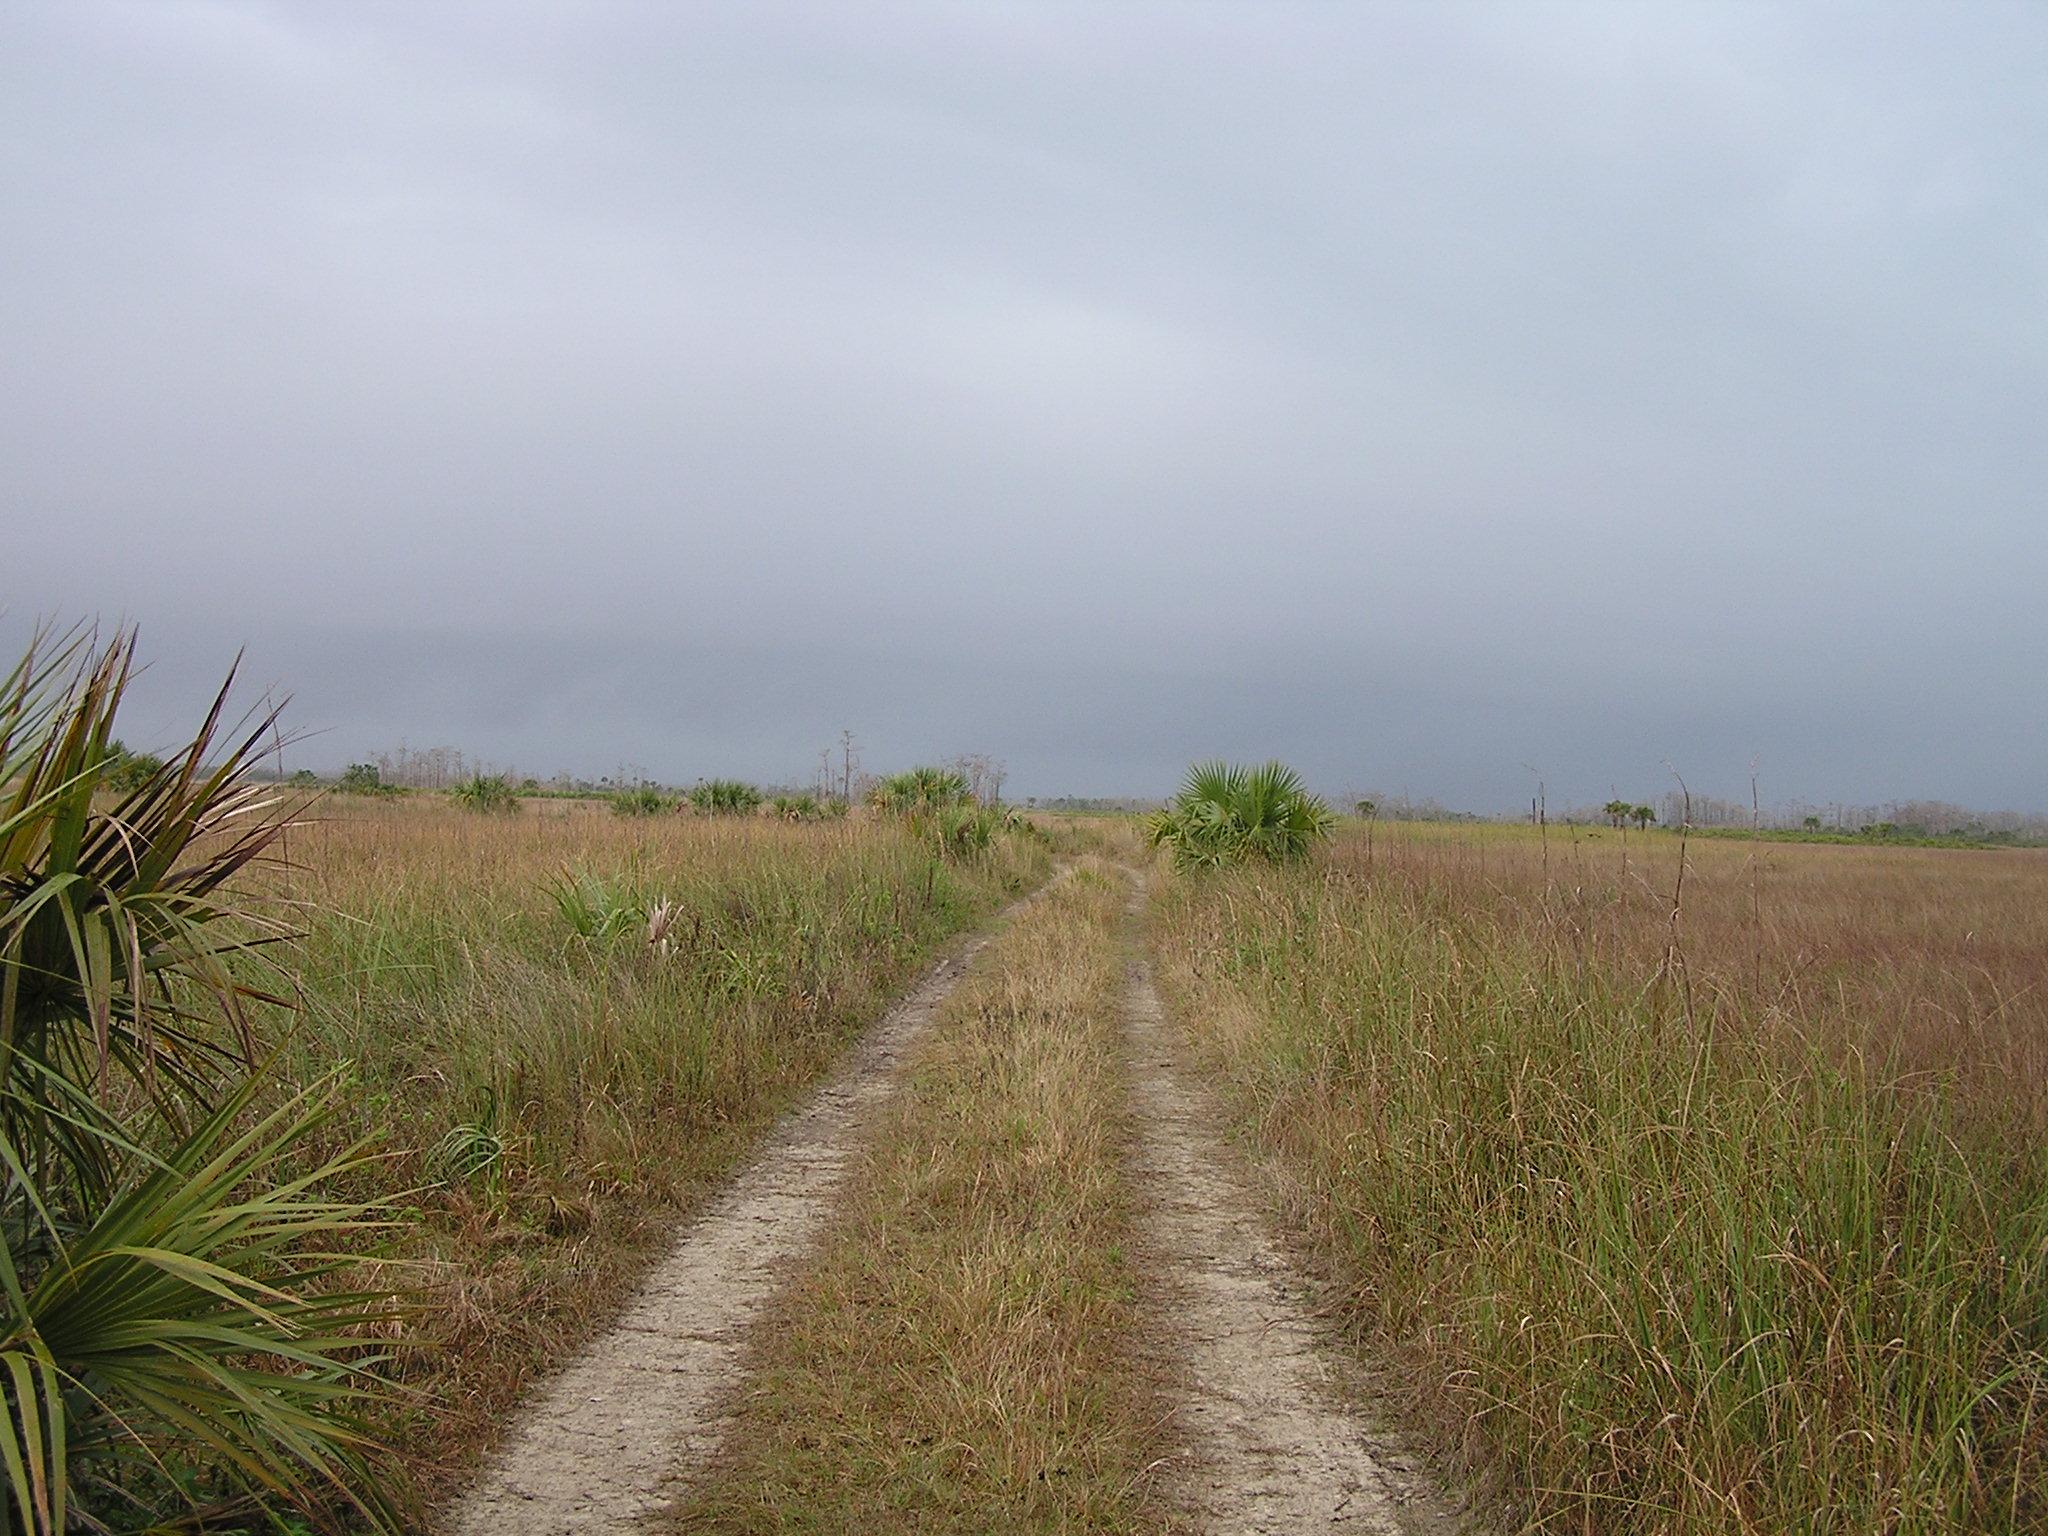 Trail running through sawgrass prairie with thunderstorm clouds in the distance